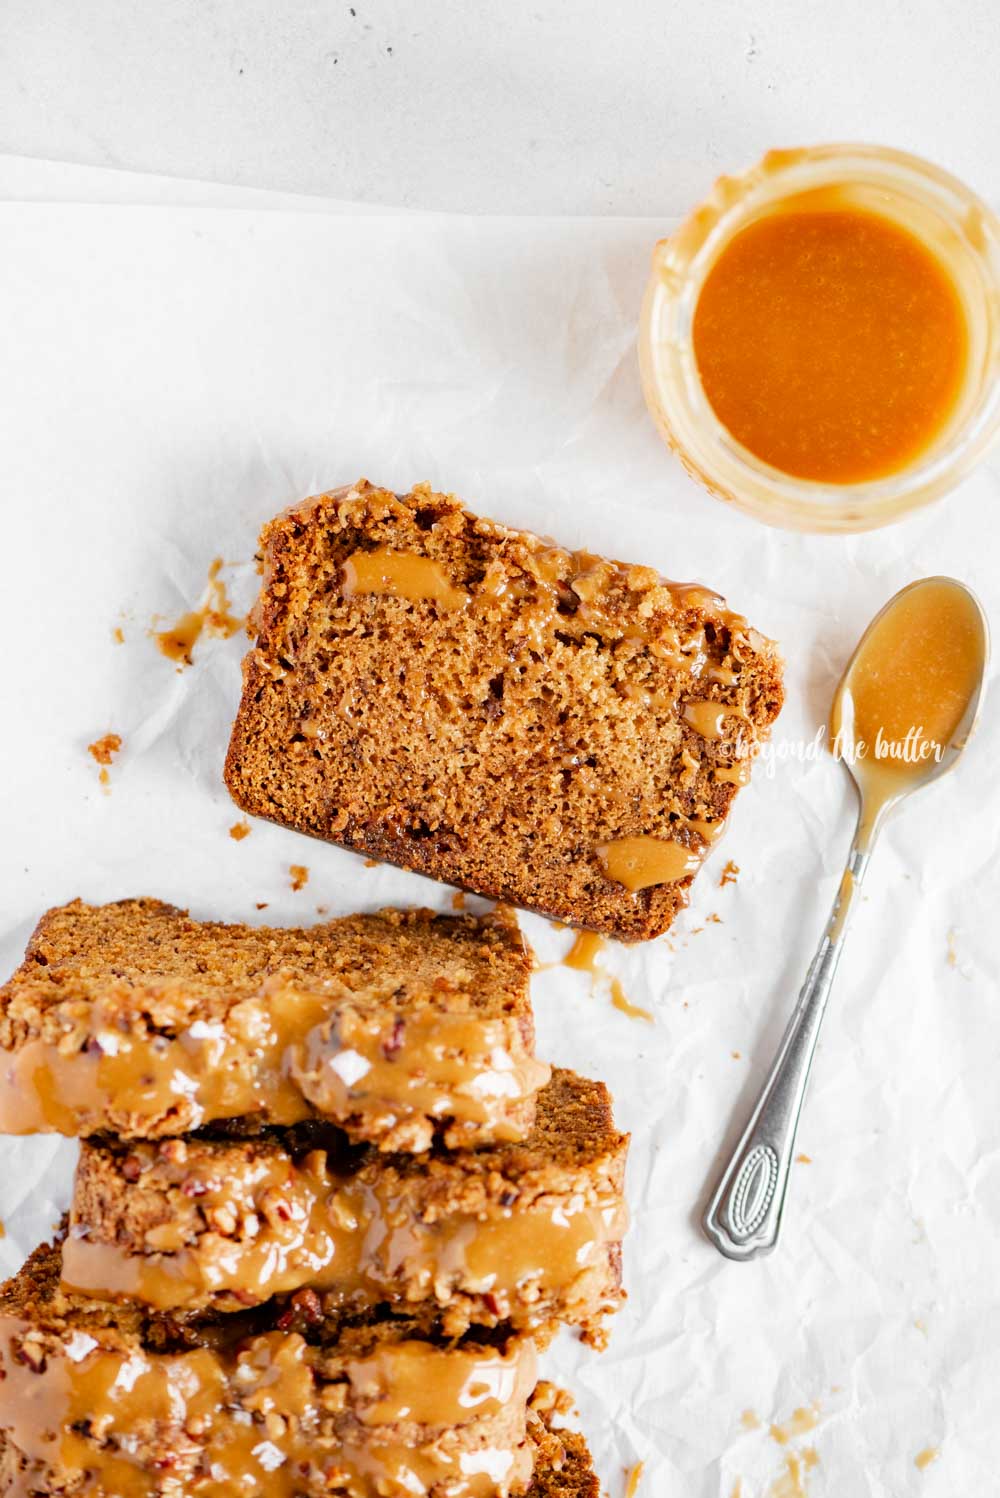 Overhead image of sliced salted caramel banana nut bread | All Images © Beyond the Butter™